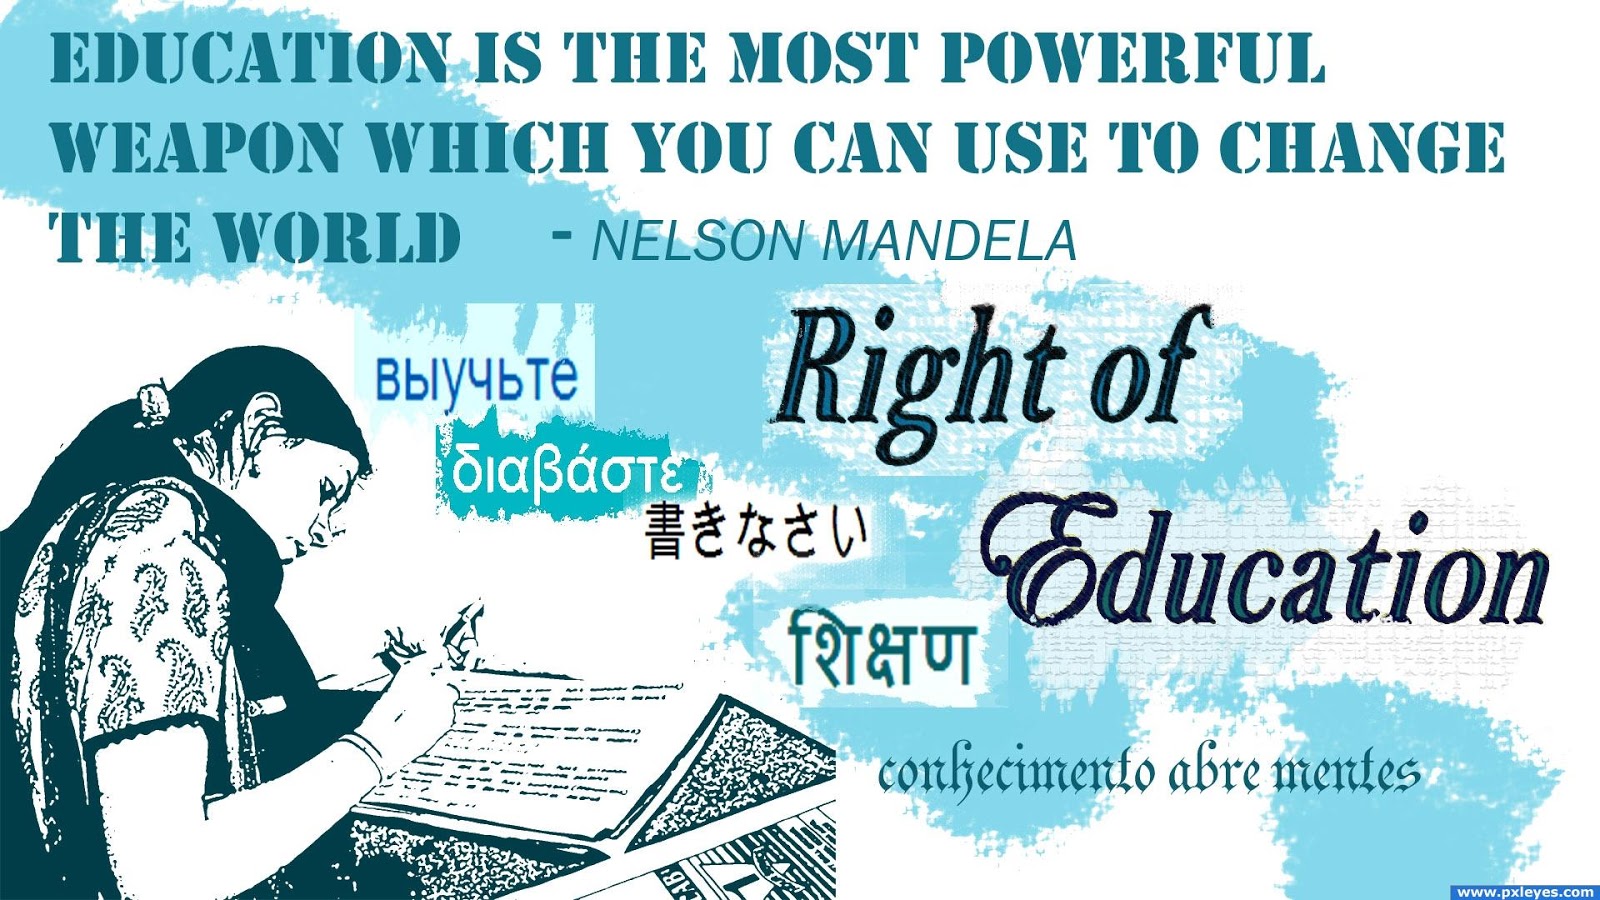 human rights of education